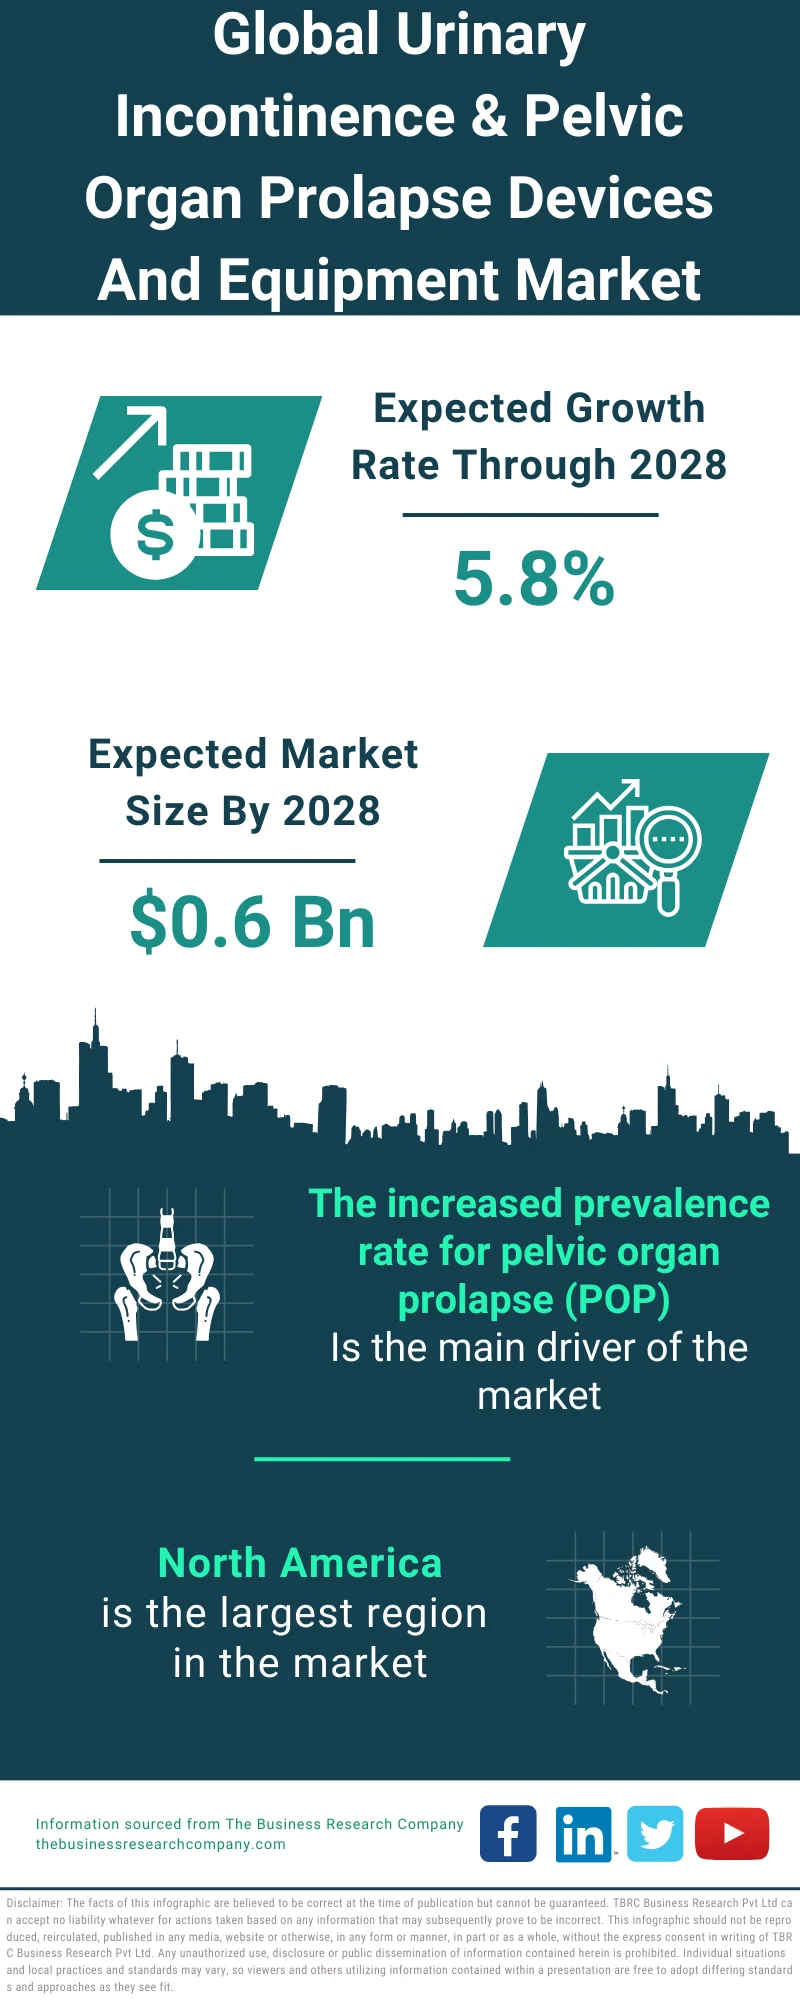 Urinary Incontinence & Pelvic Organ Prolapse Devices And Equipment Market